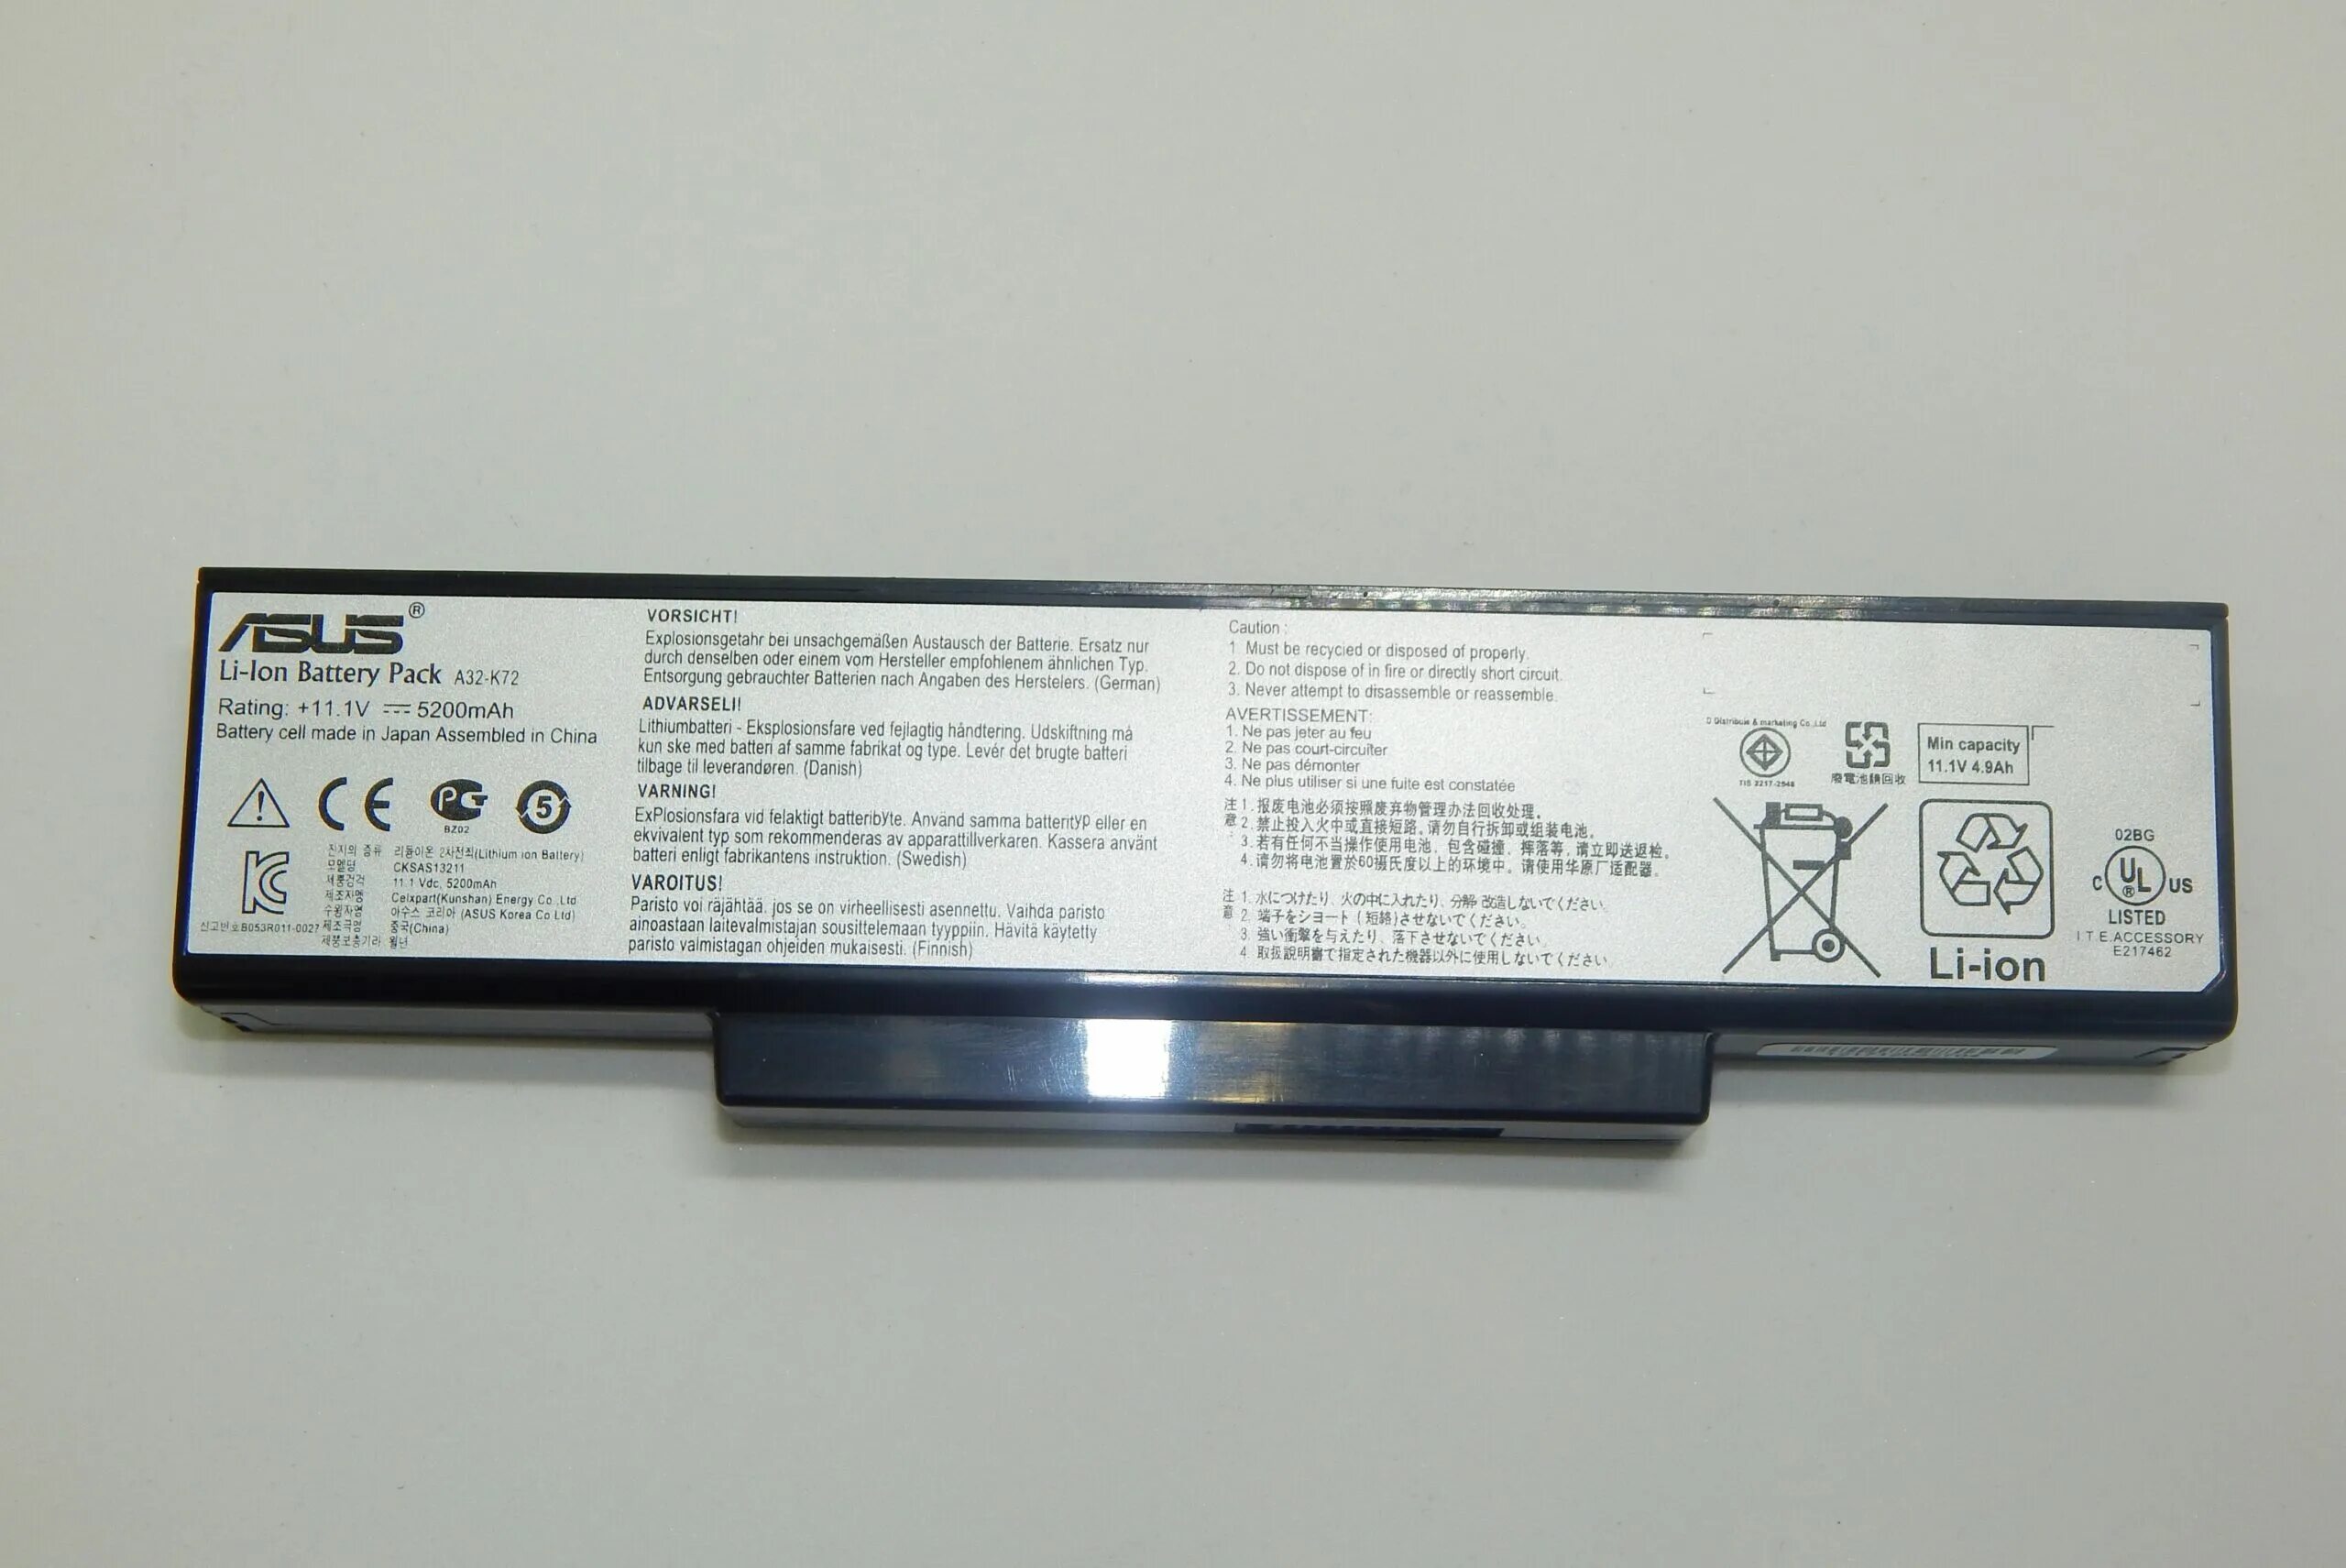 Battery a32. Аккумулятор ASUS a32-k72. ASUS li-ion Battery Pack a32-k72. A32-k72 аккумулятор. Аккумулятор для ноутбука li-ion Battery Pack a32-k72 ASUS.